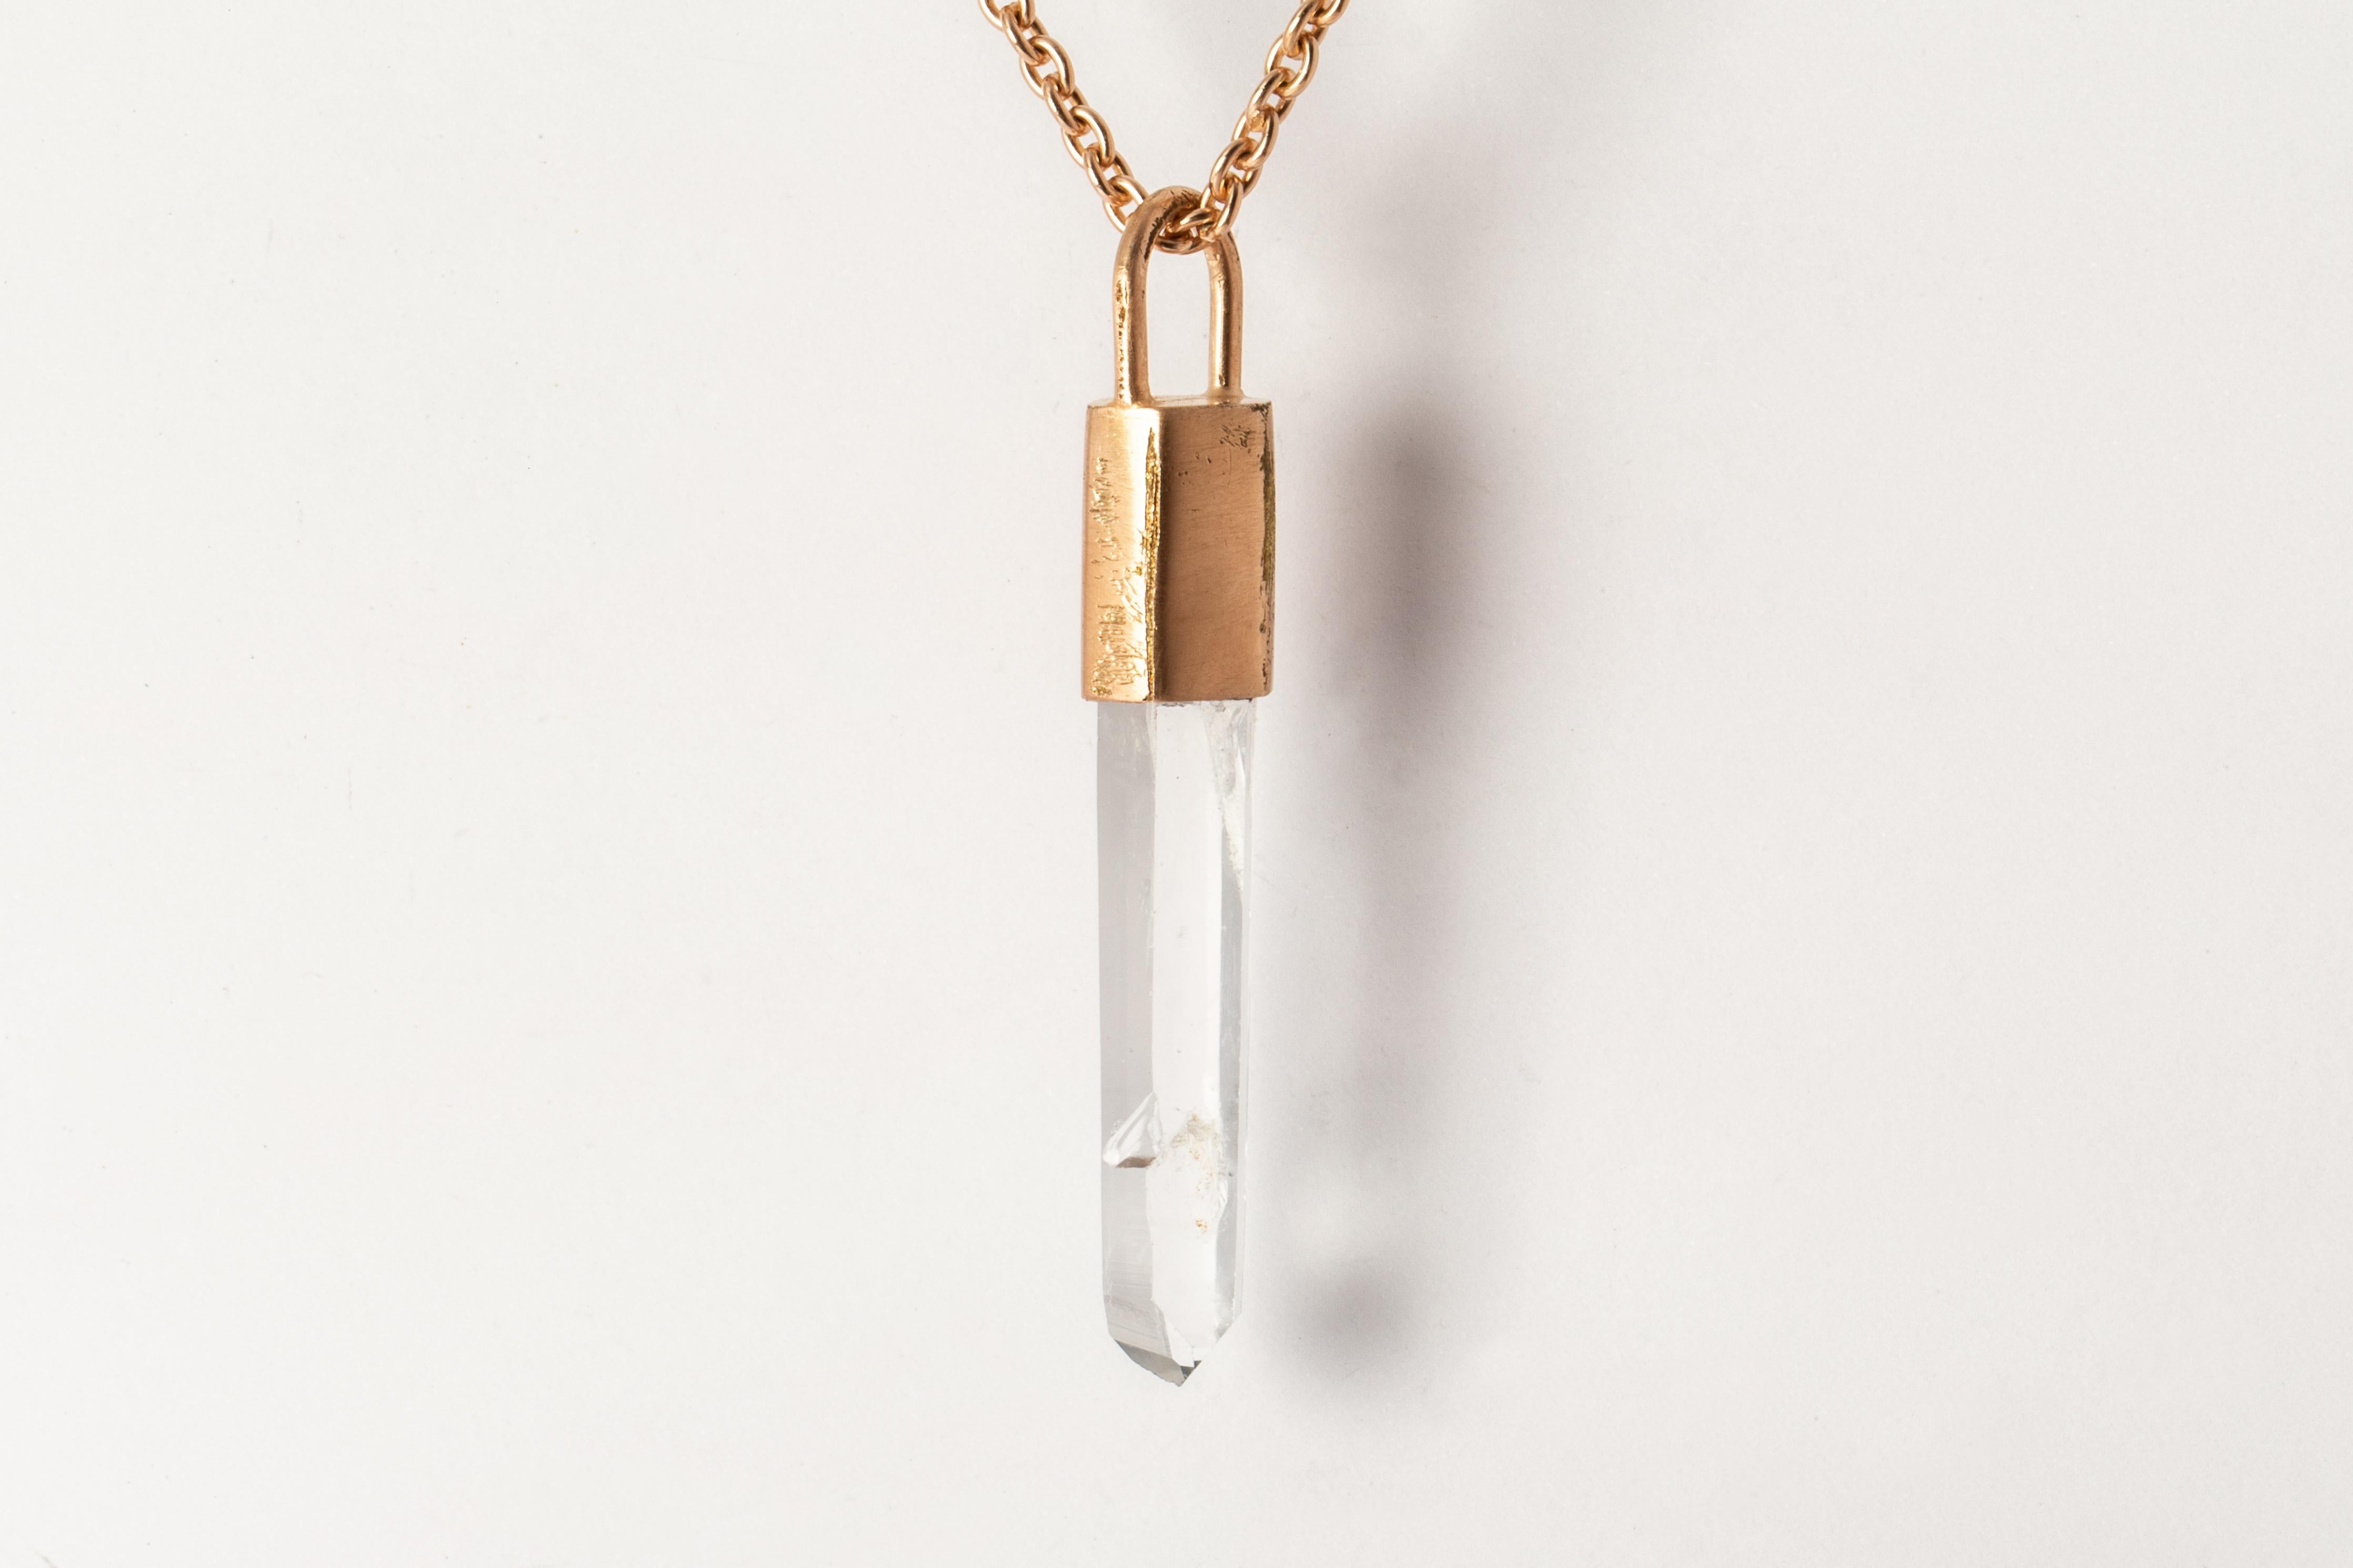 Talisman Necklace (Lemurian Laser, AM+AMA+LEM) In New Condition For Sale In Hong Kong, Hong Kong Island